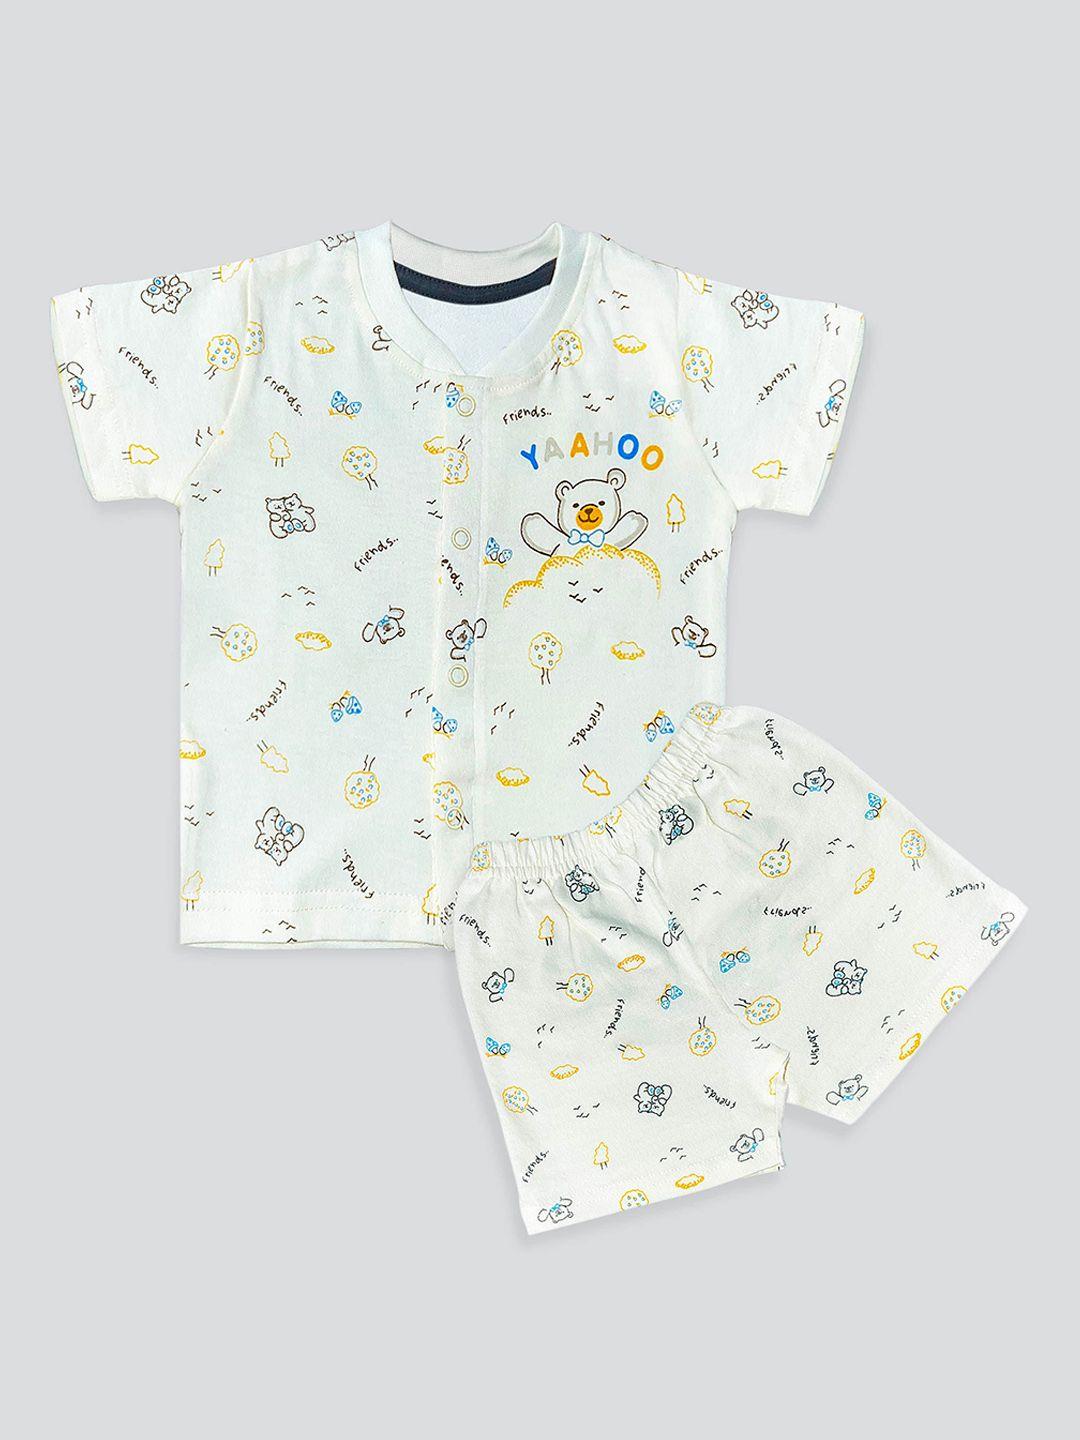 baesd infants printed pure cotton t-shirt with shorts